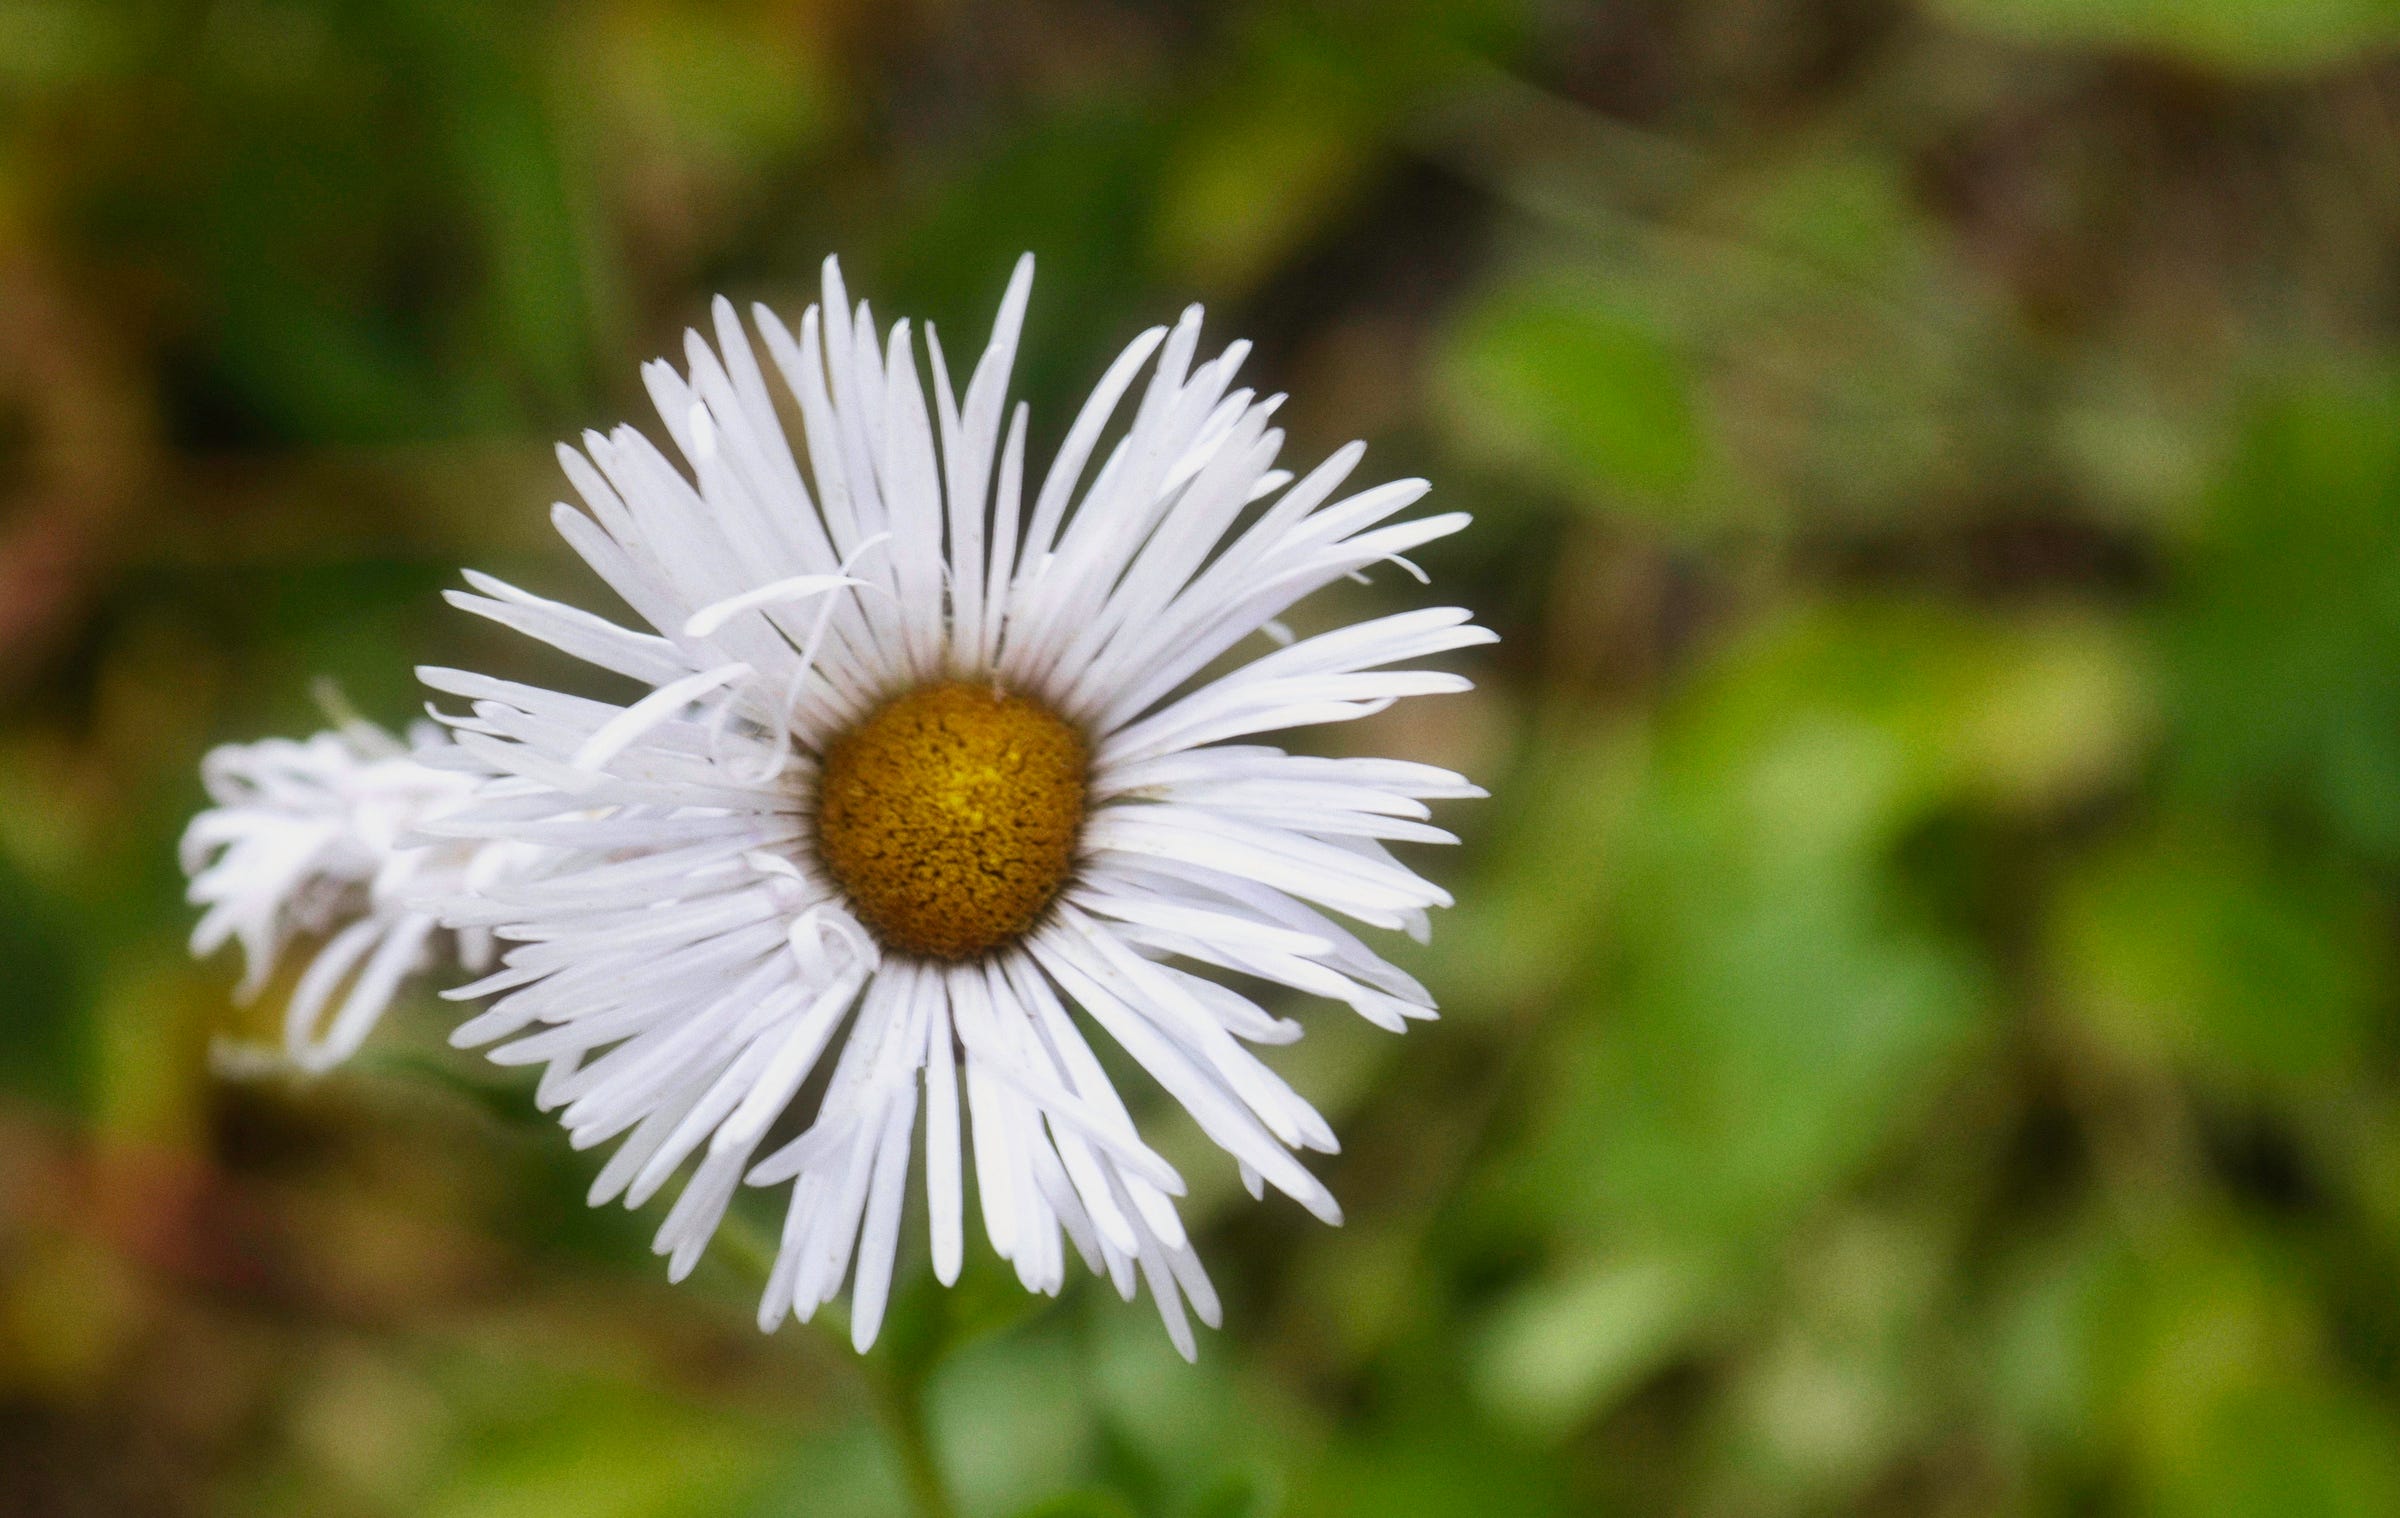 A single white daisy against a green blurred background